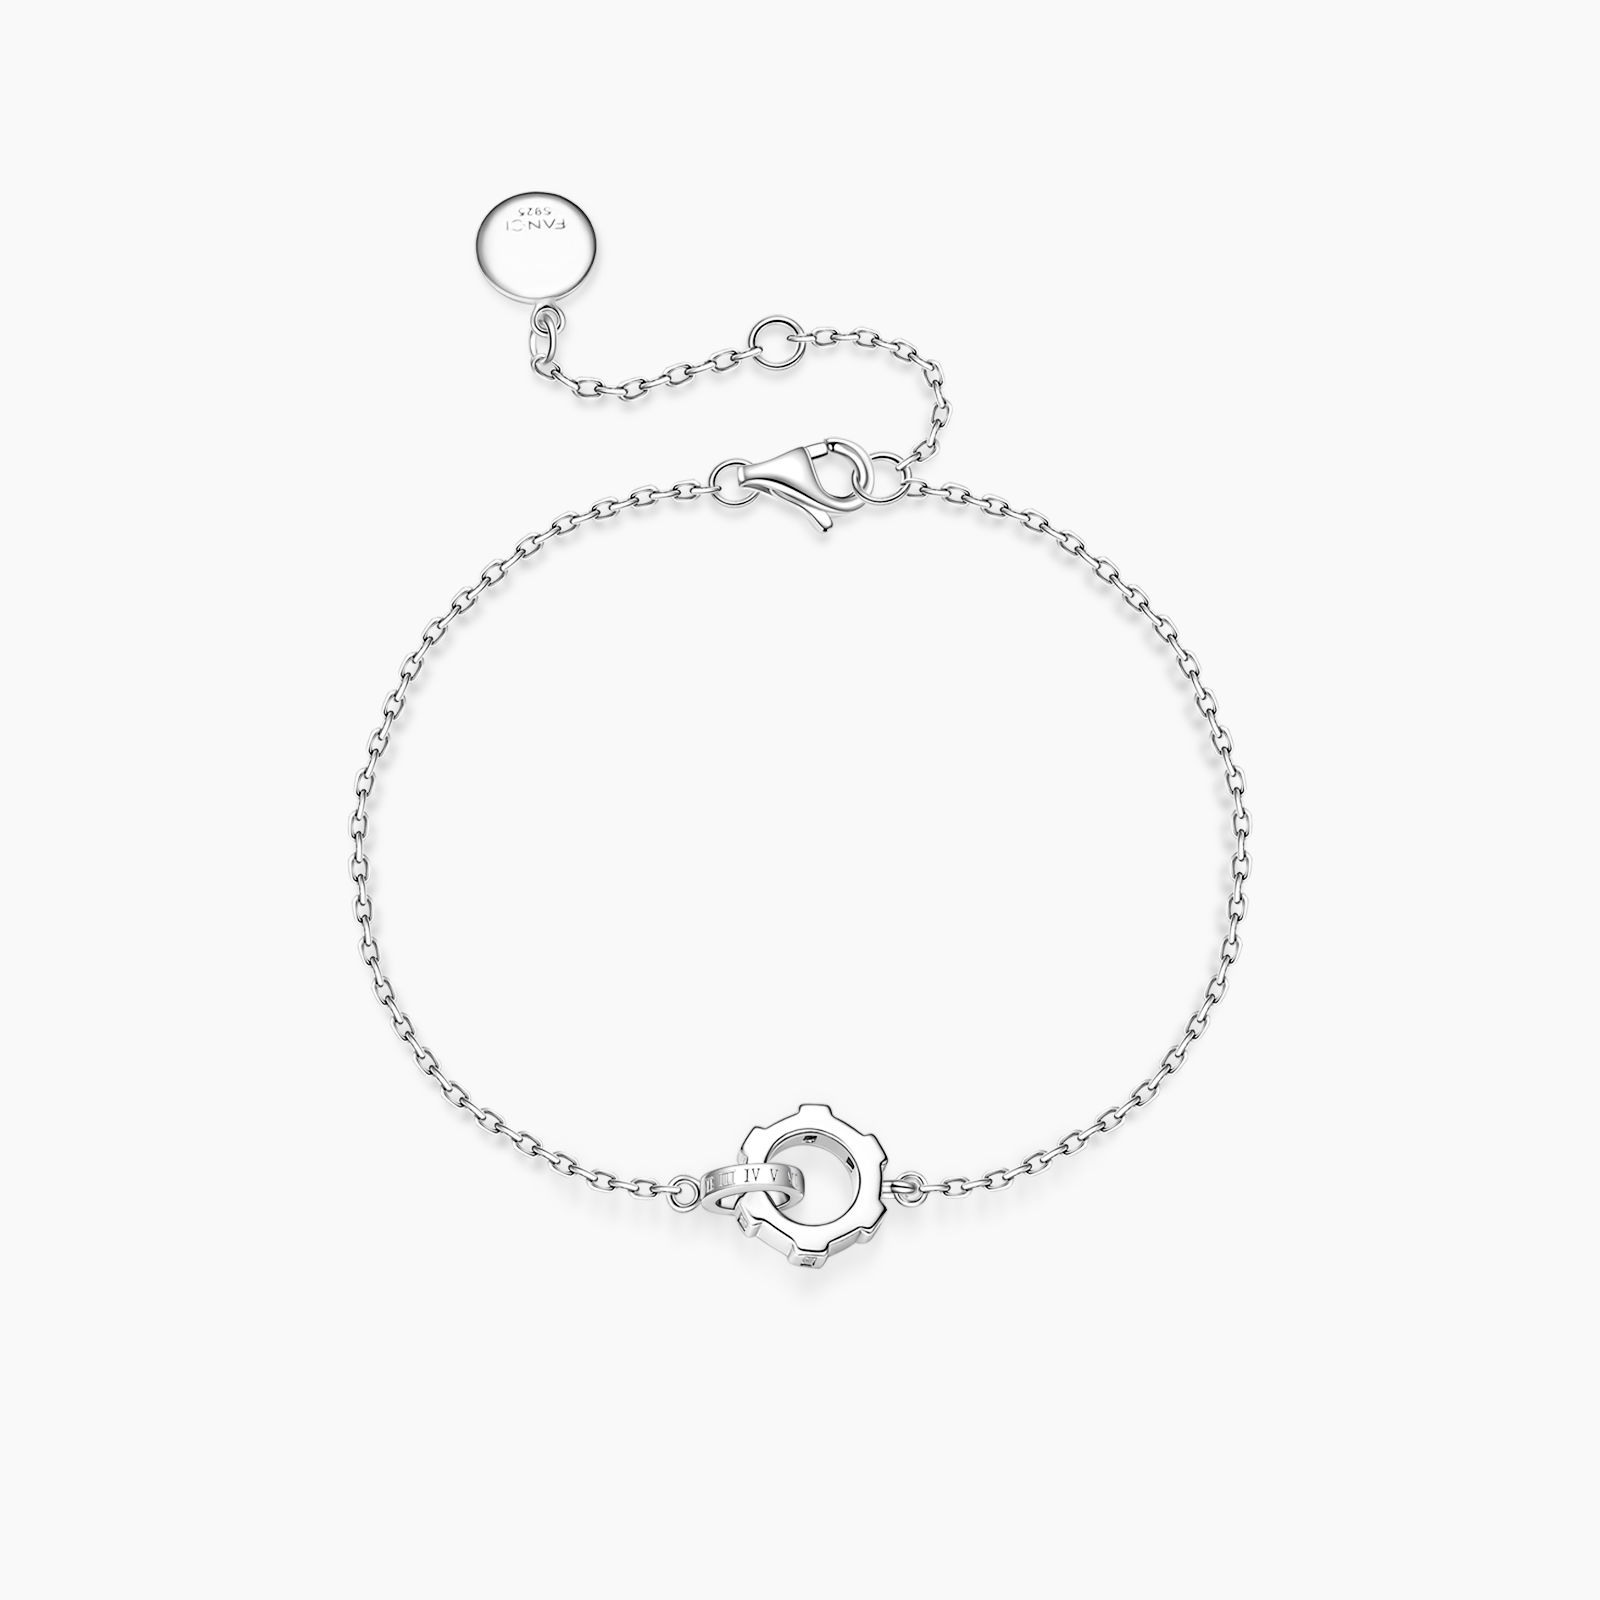 FANCIME "Infinite Time Lock" Couples Promise Sterling Silver Bracelet